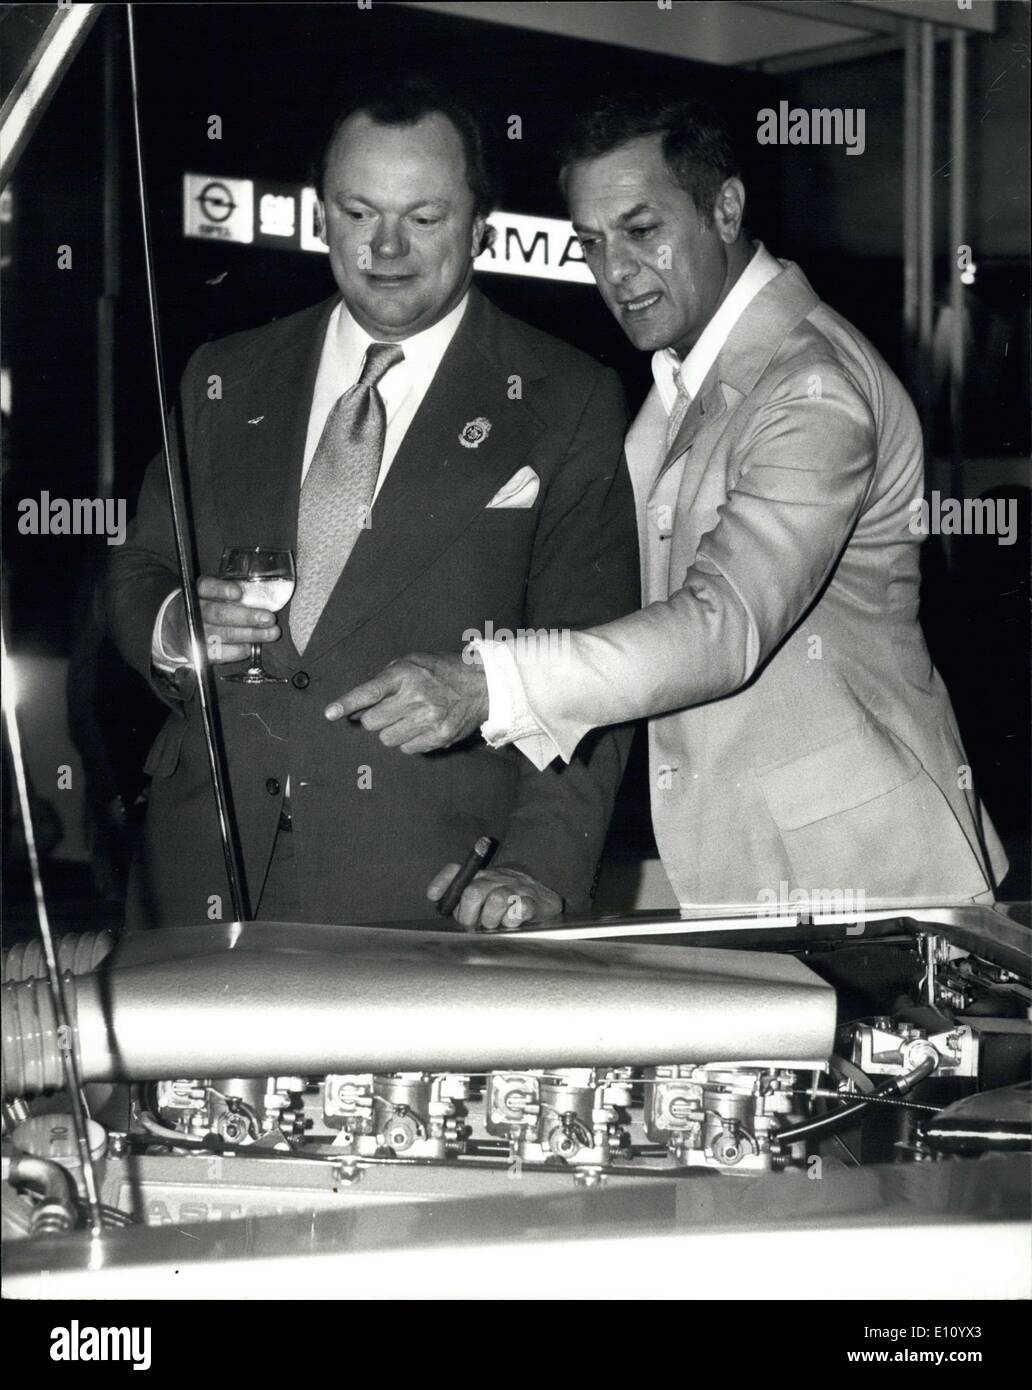 Oct. 15, 1974 - Motor Show Earls Court; Photo Shows Famous America actor Tony Curtis takes a lock at the Aston Marin with its Chairman S.W. Willson during his visit to the Motor show today. Stock Photo